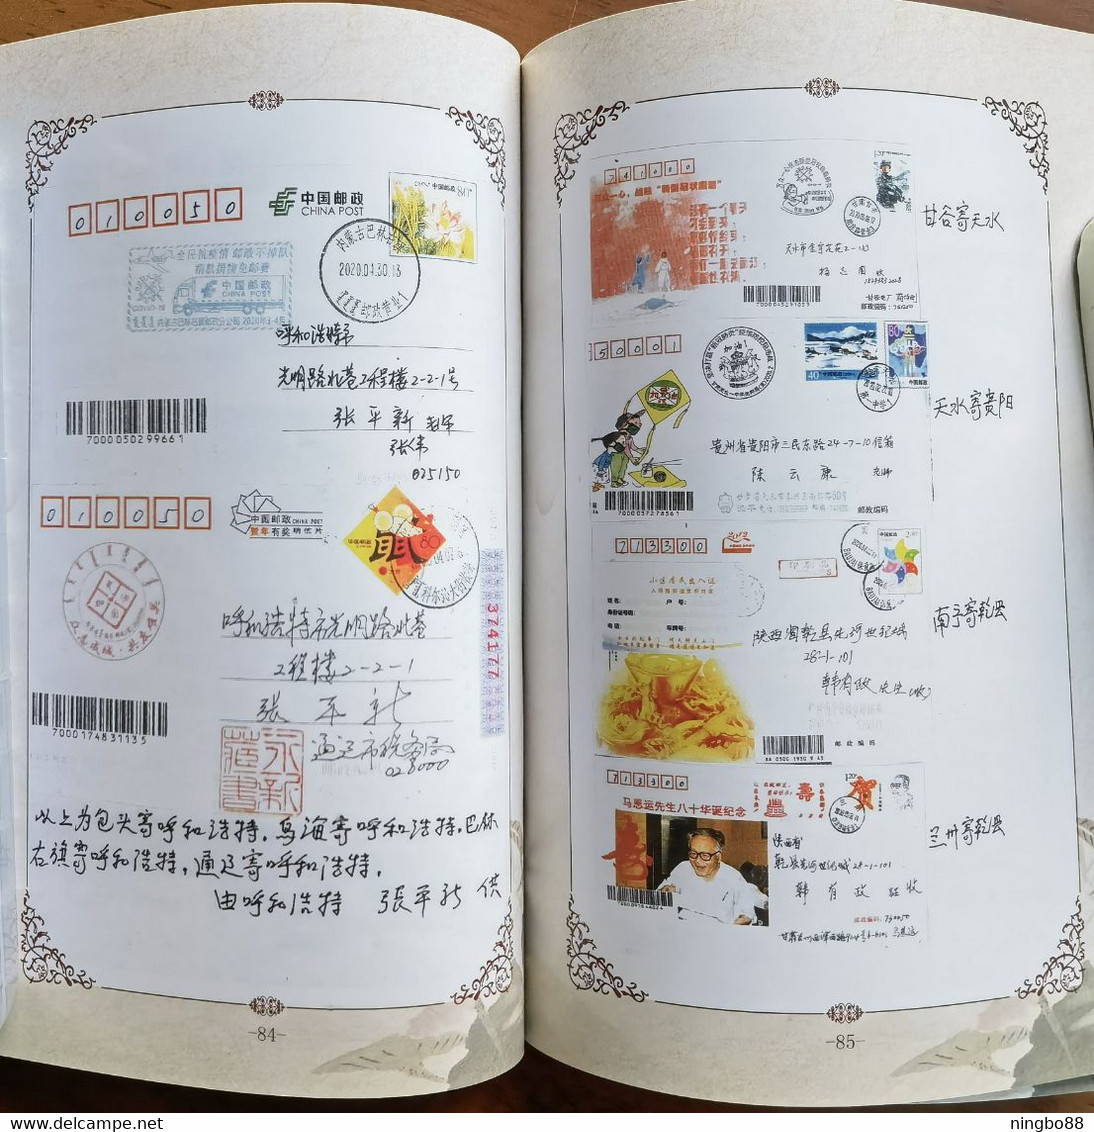 China 2020 fighting COVID-19 pandemic postmarks & covers philatelic collection special catalogue book 164 Pages